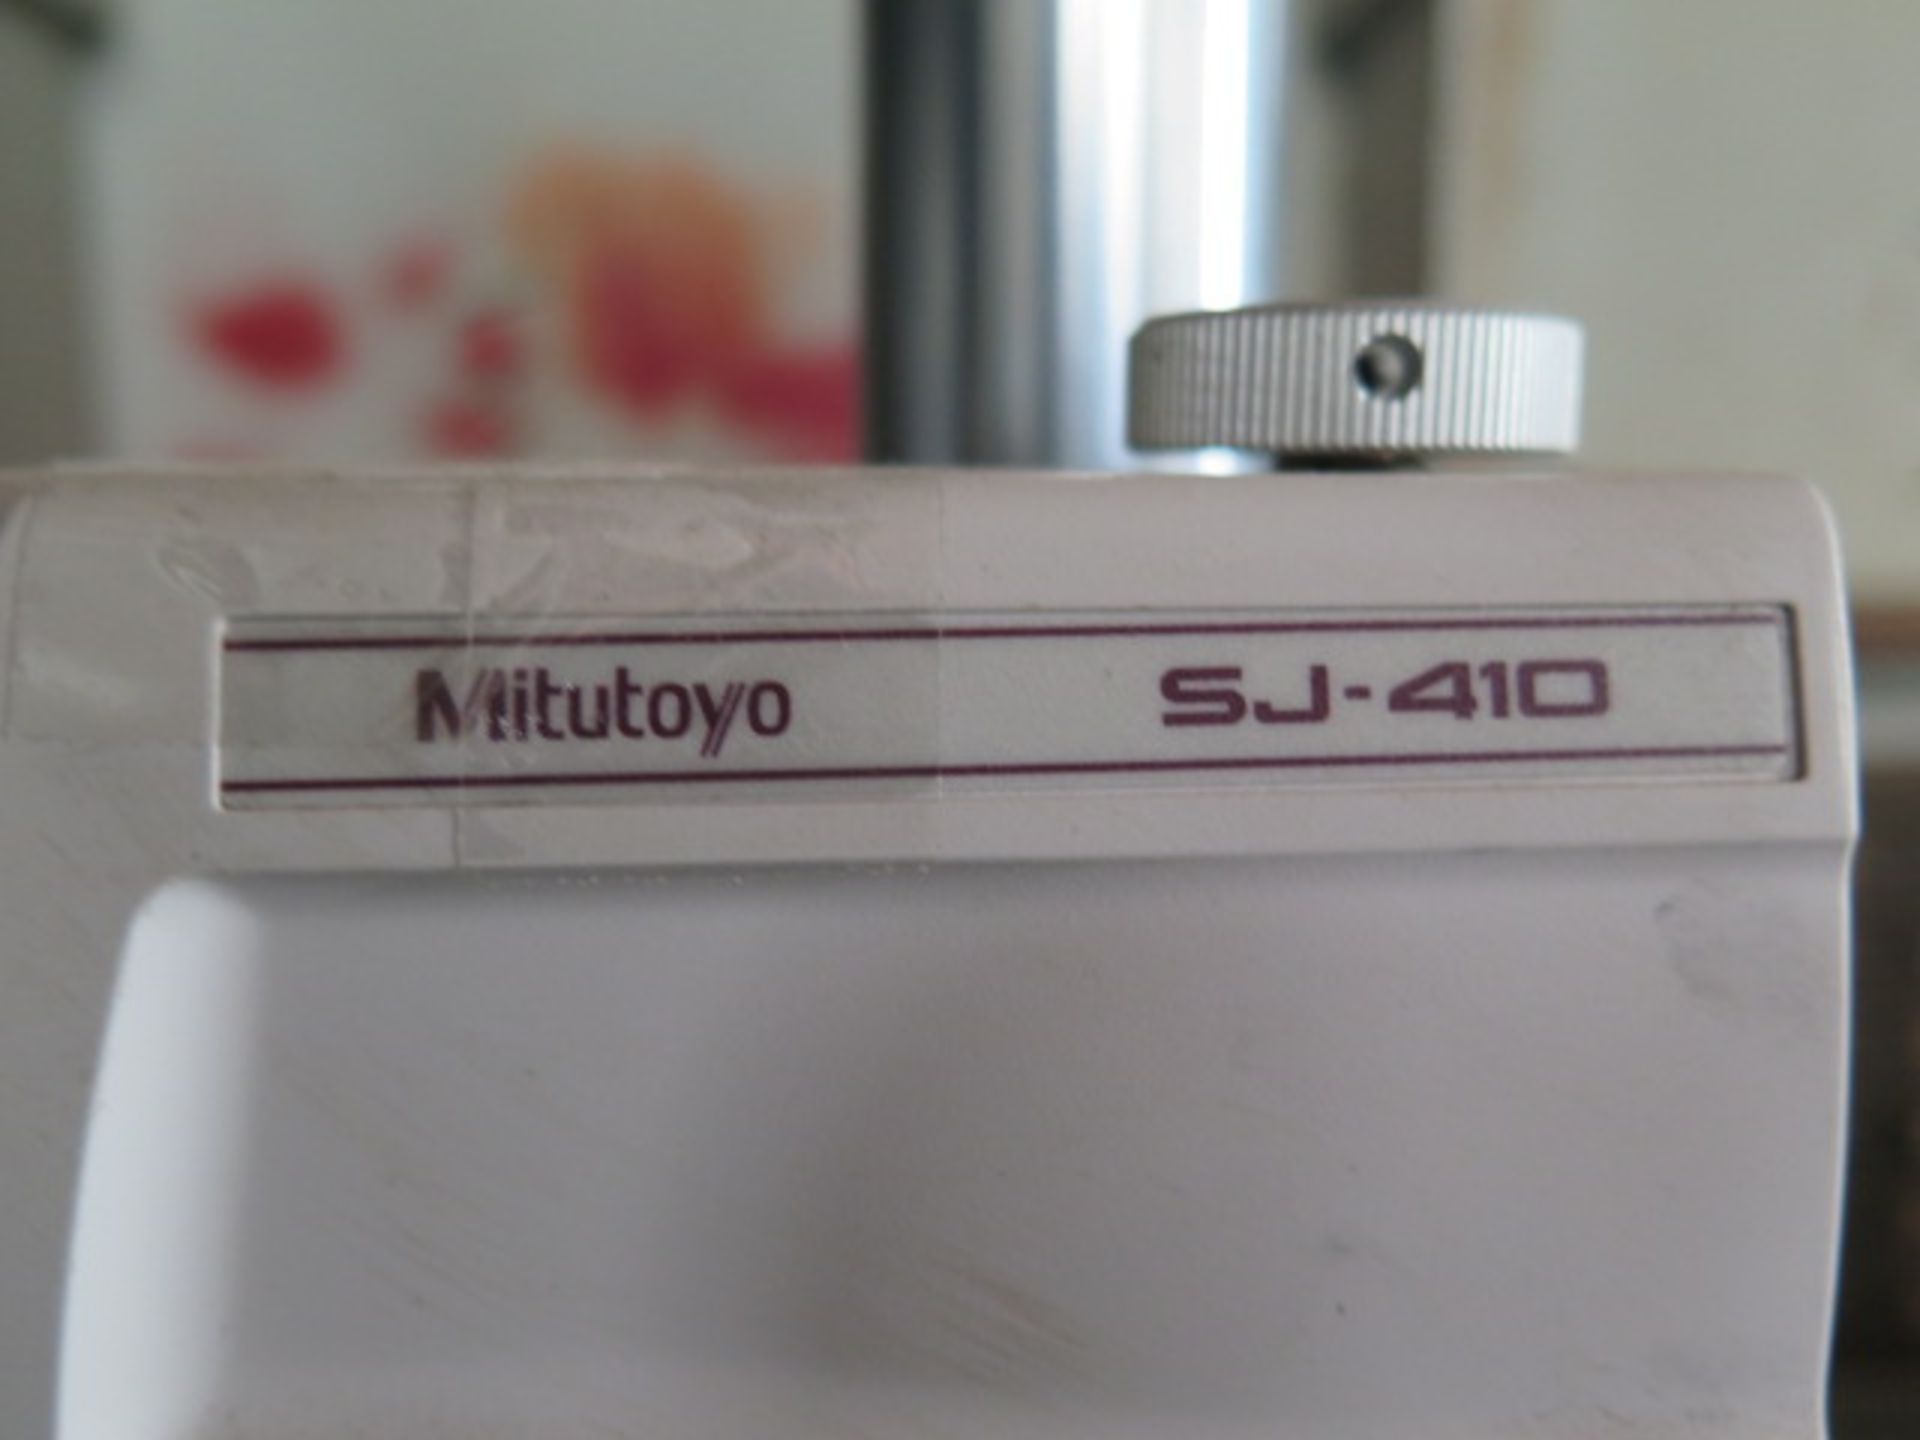 Mitutoyo SJ-410 Surface Roughness Gage w/ Digital Controls, Printer, 10” x 16” Granite SOLD AS IS - Image 5 of 5